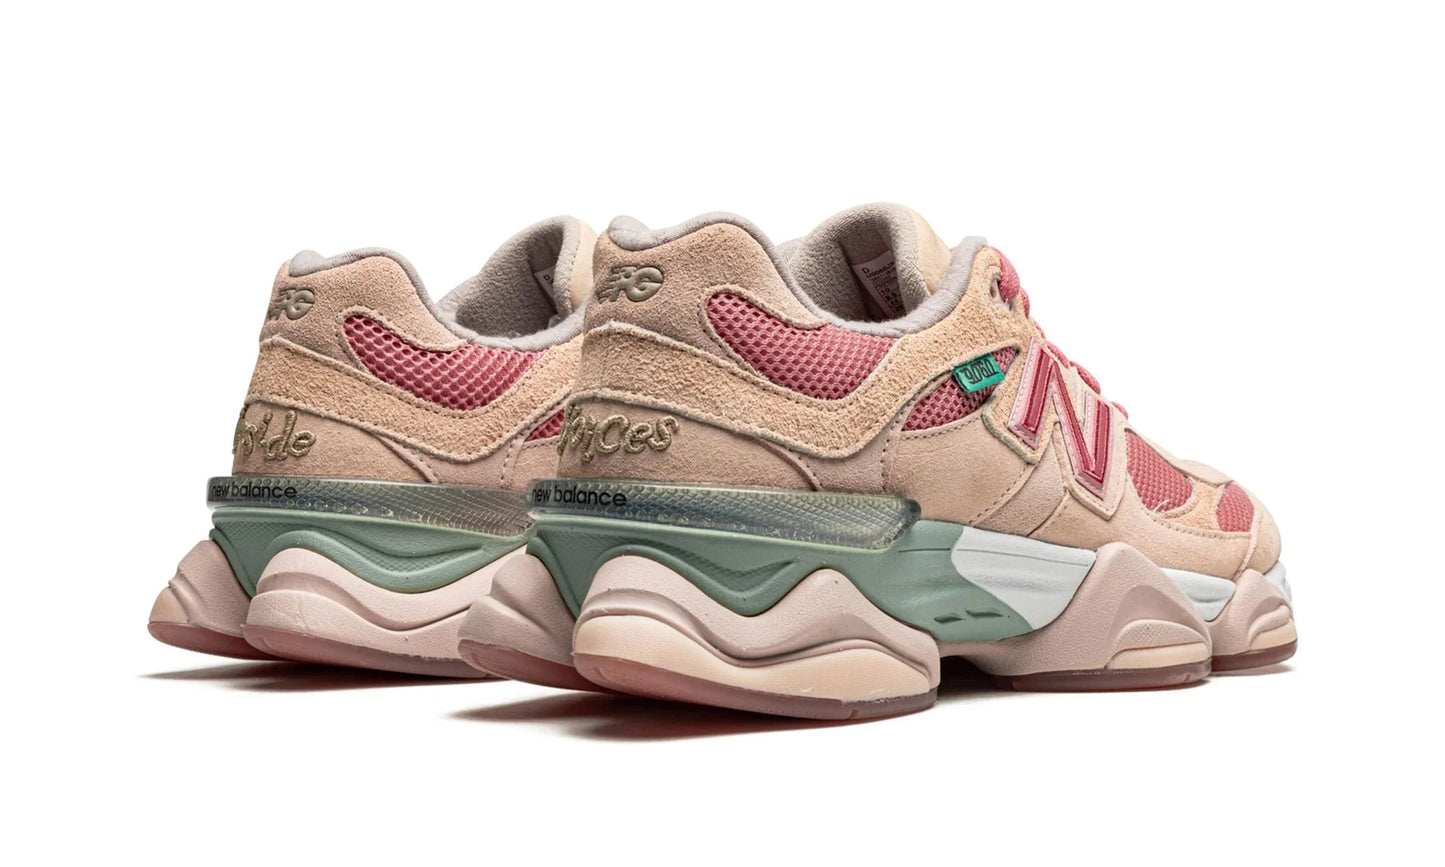 NEW BALANCE 9060 "Joe Fresh Goods - Inside Voices Penny Cookie Pink"